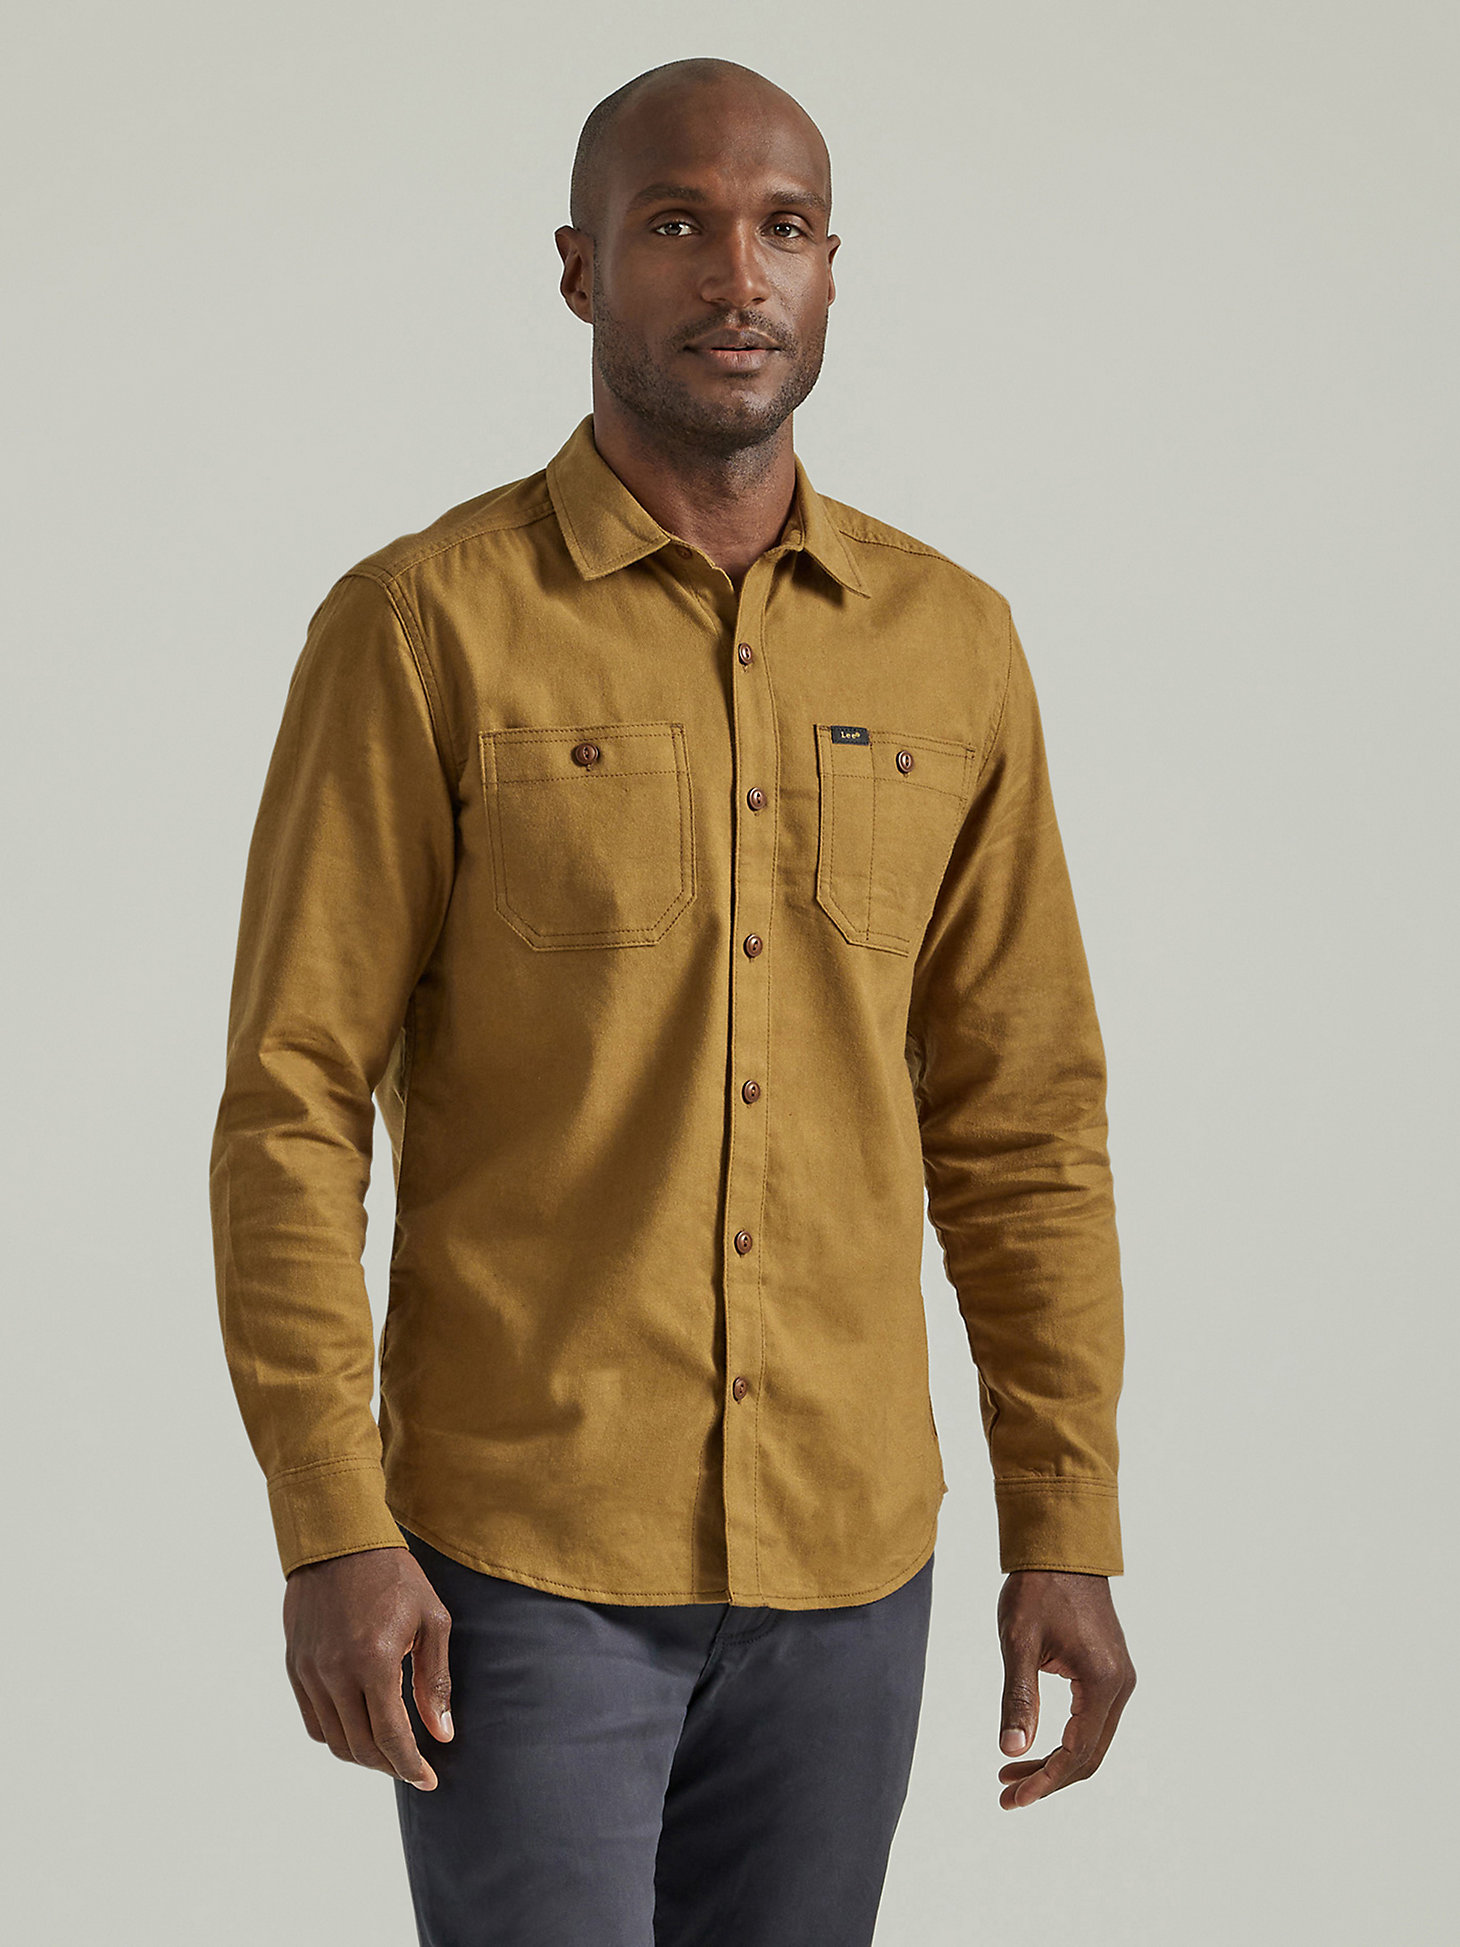 Men's Extreme Working West Shirt